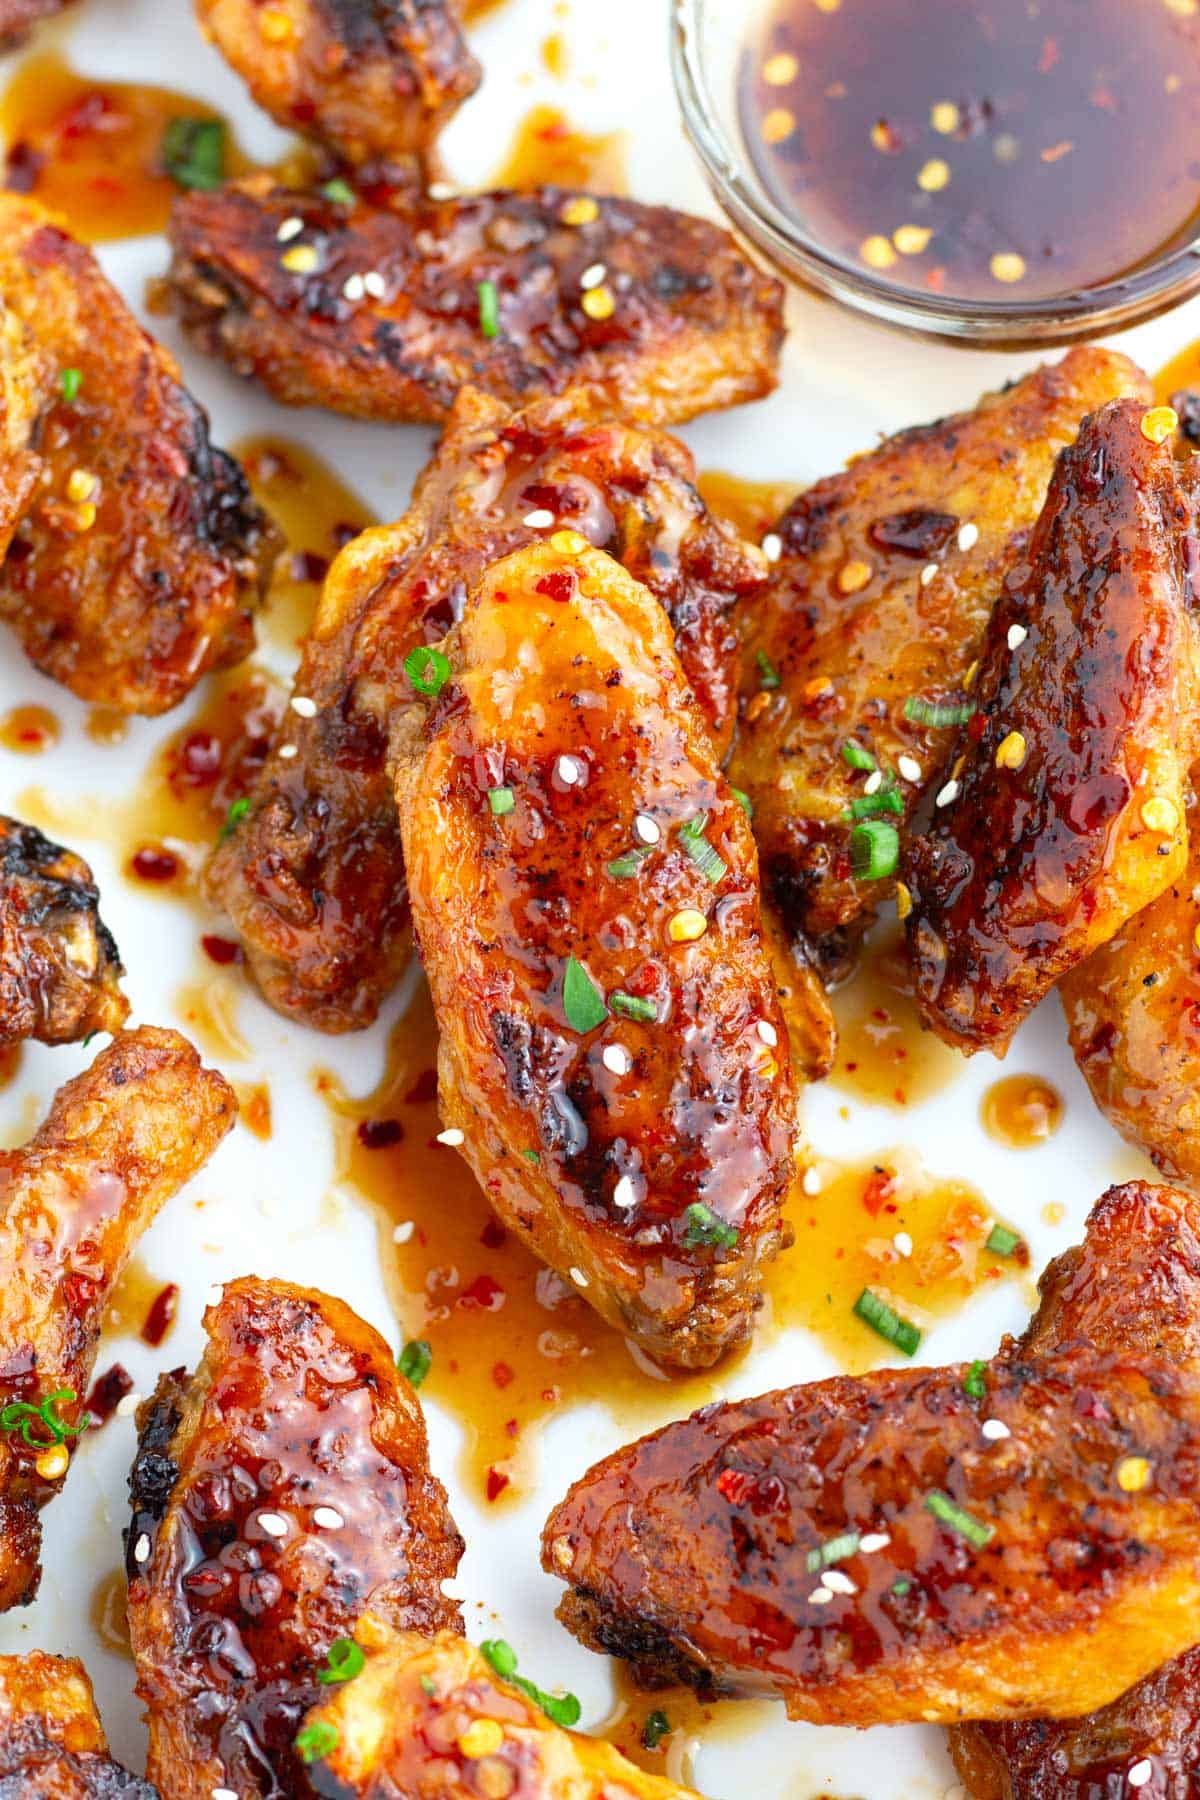 Pile of sweet and savory wings on a platter sprinkled with sesame seeds and green onions.